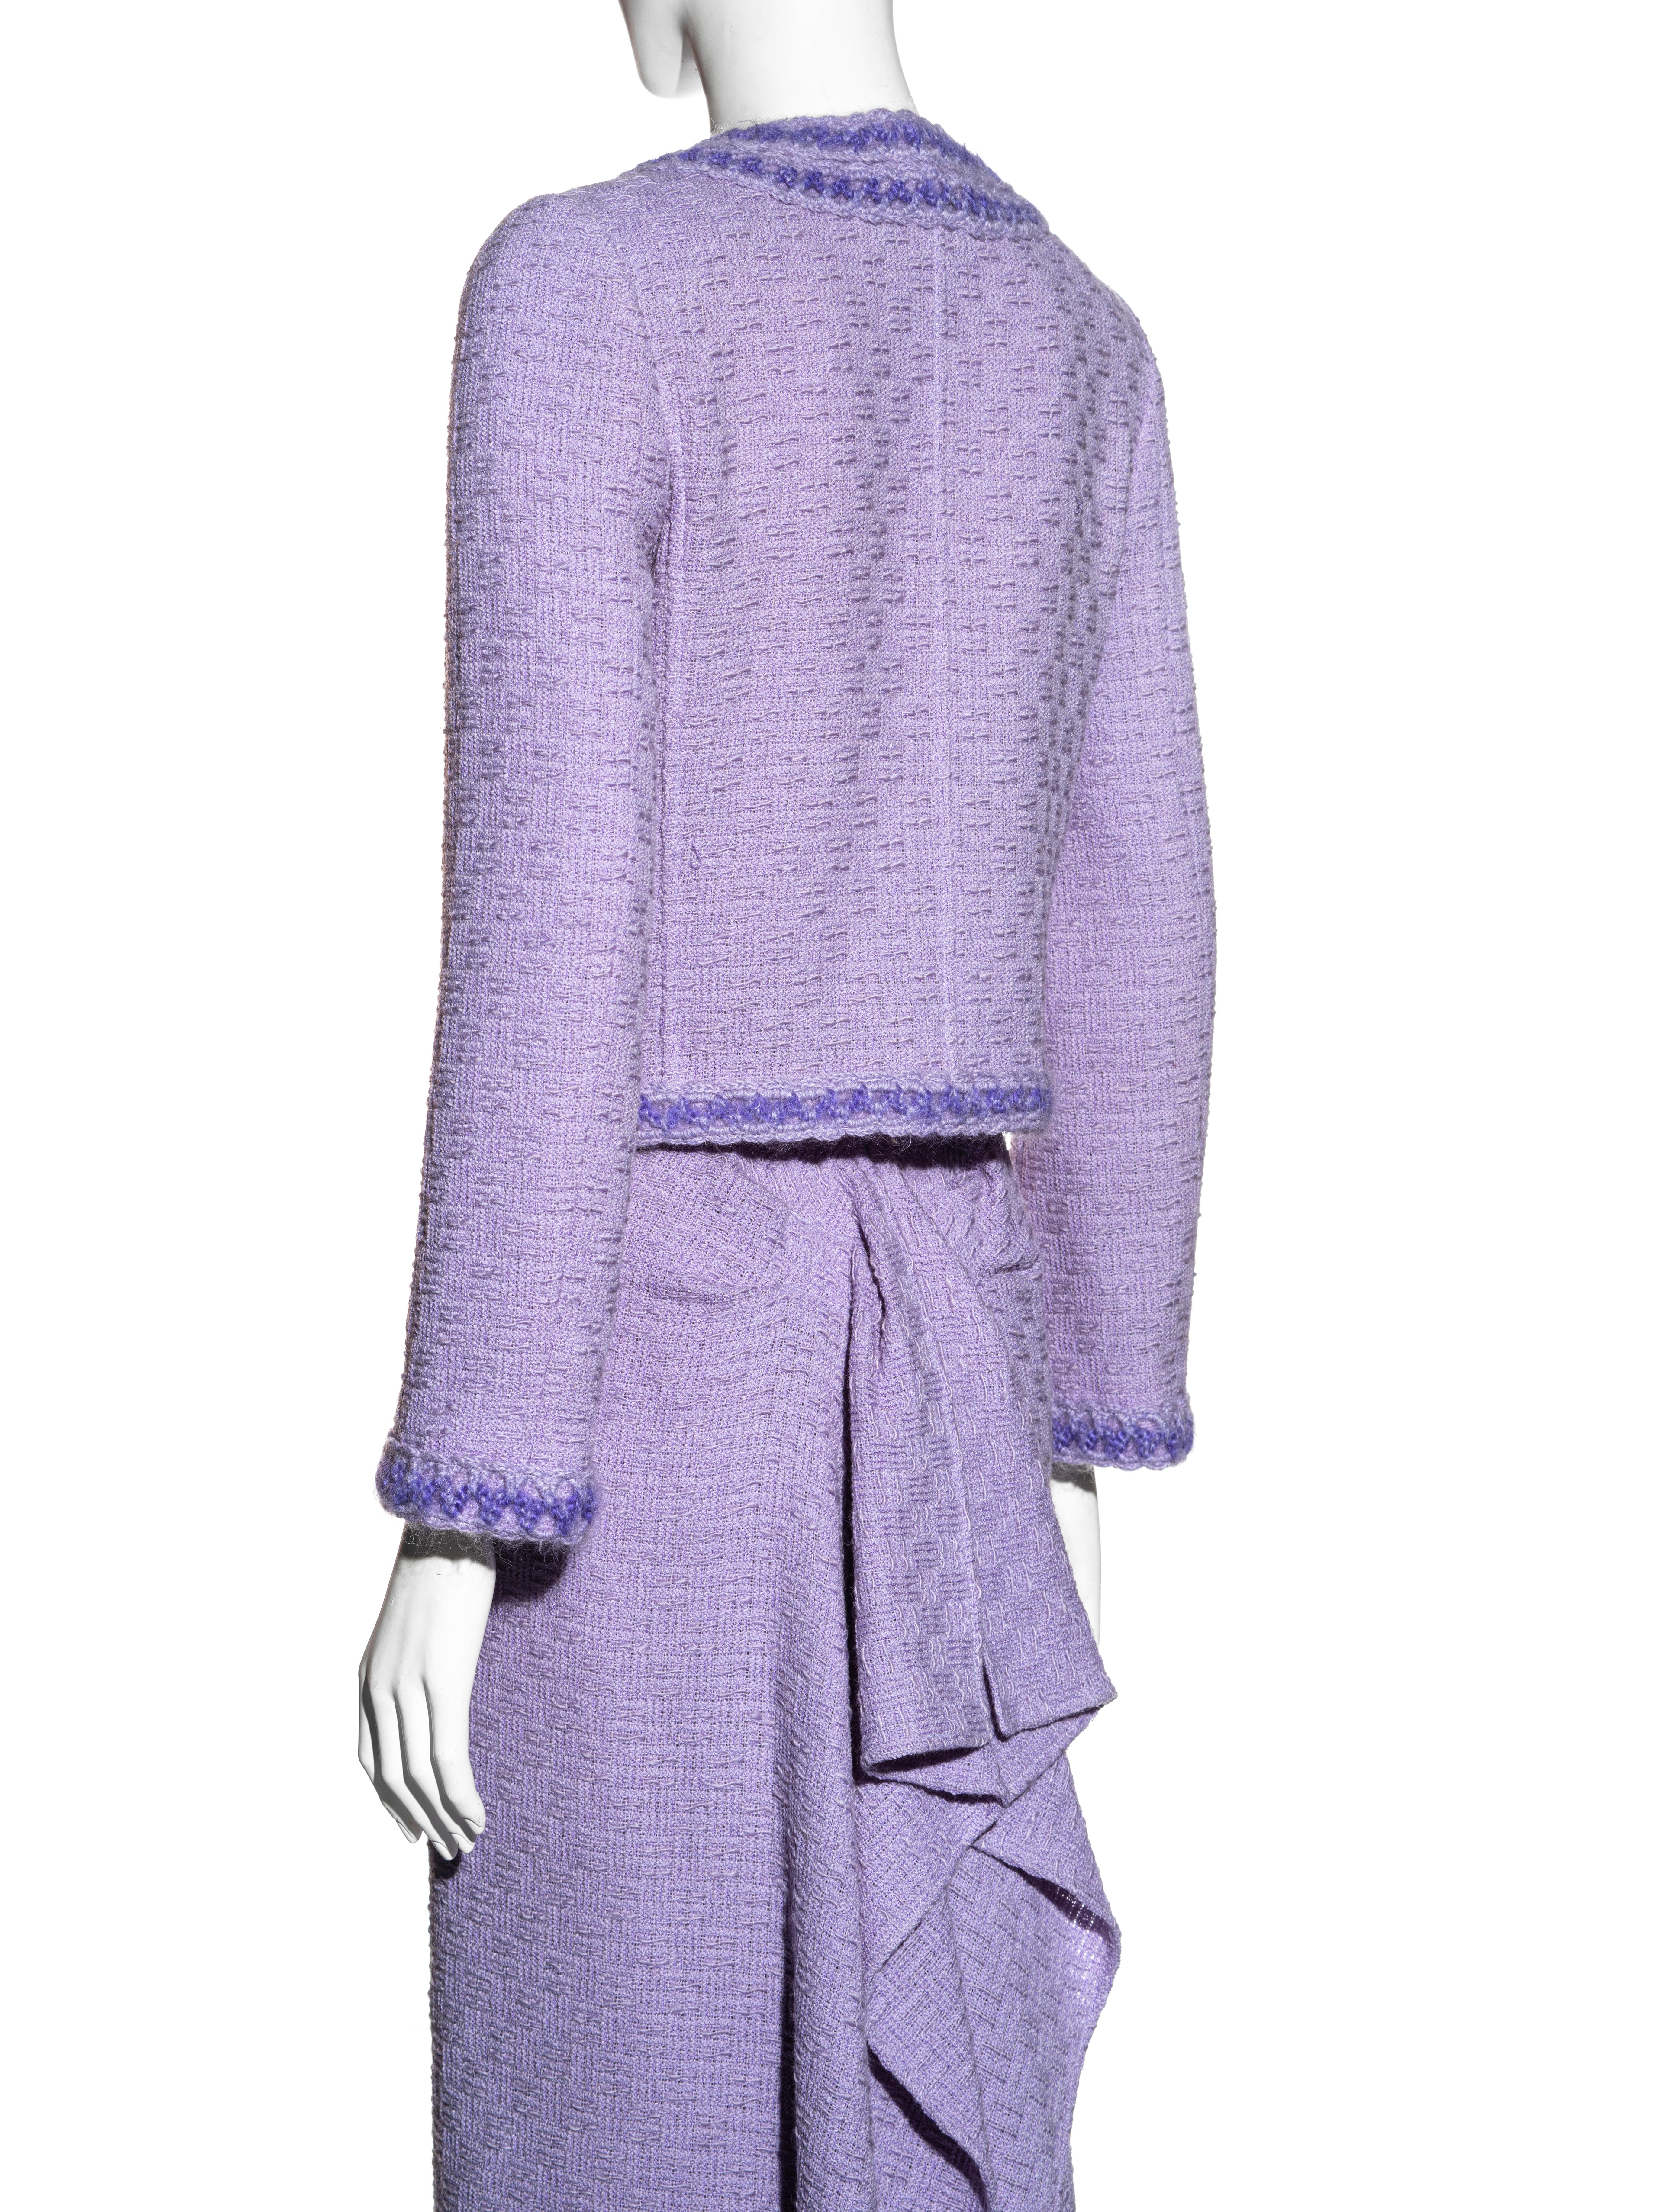 Chanel by Karl Lagerfeld lilac tweed jacket and maxi skirt suit, fw 1998 For Sale 4